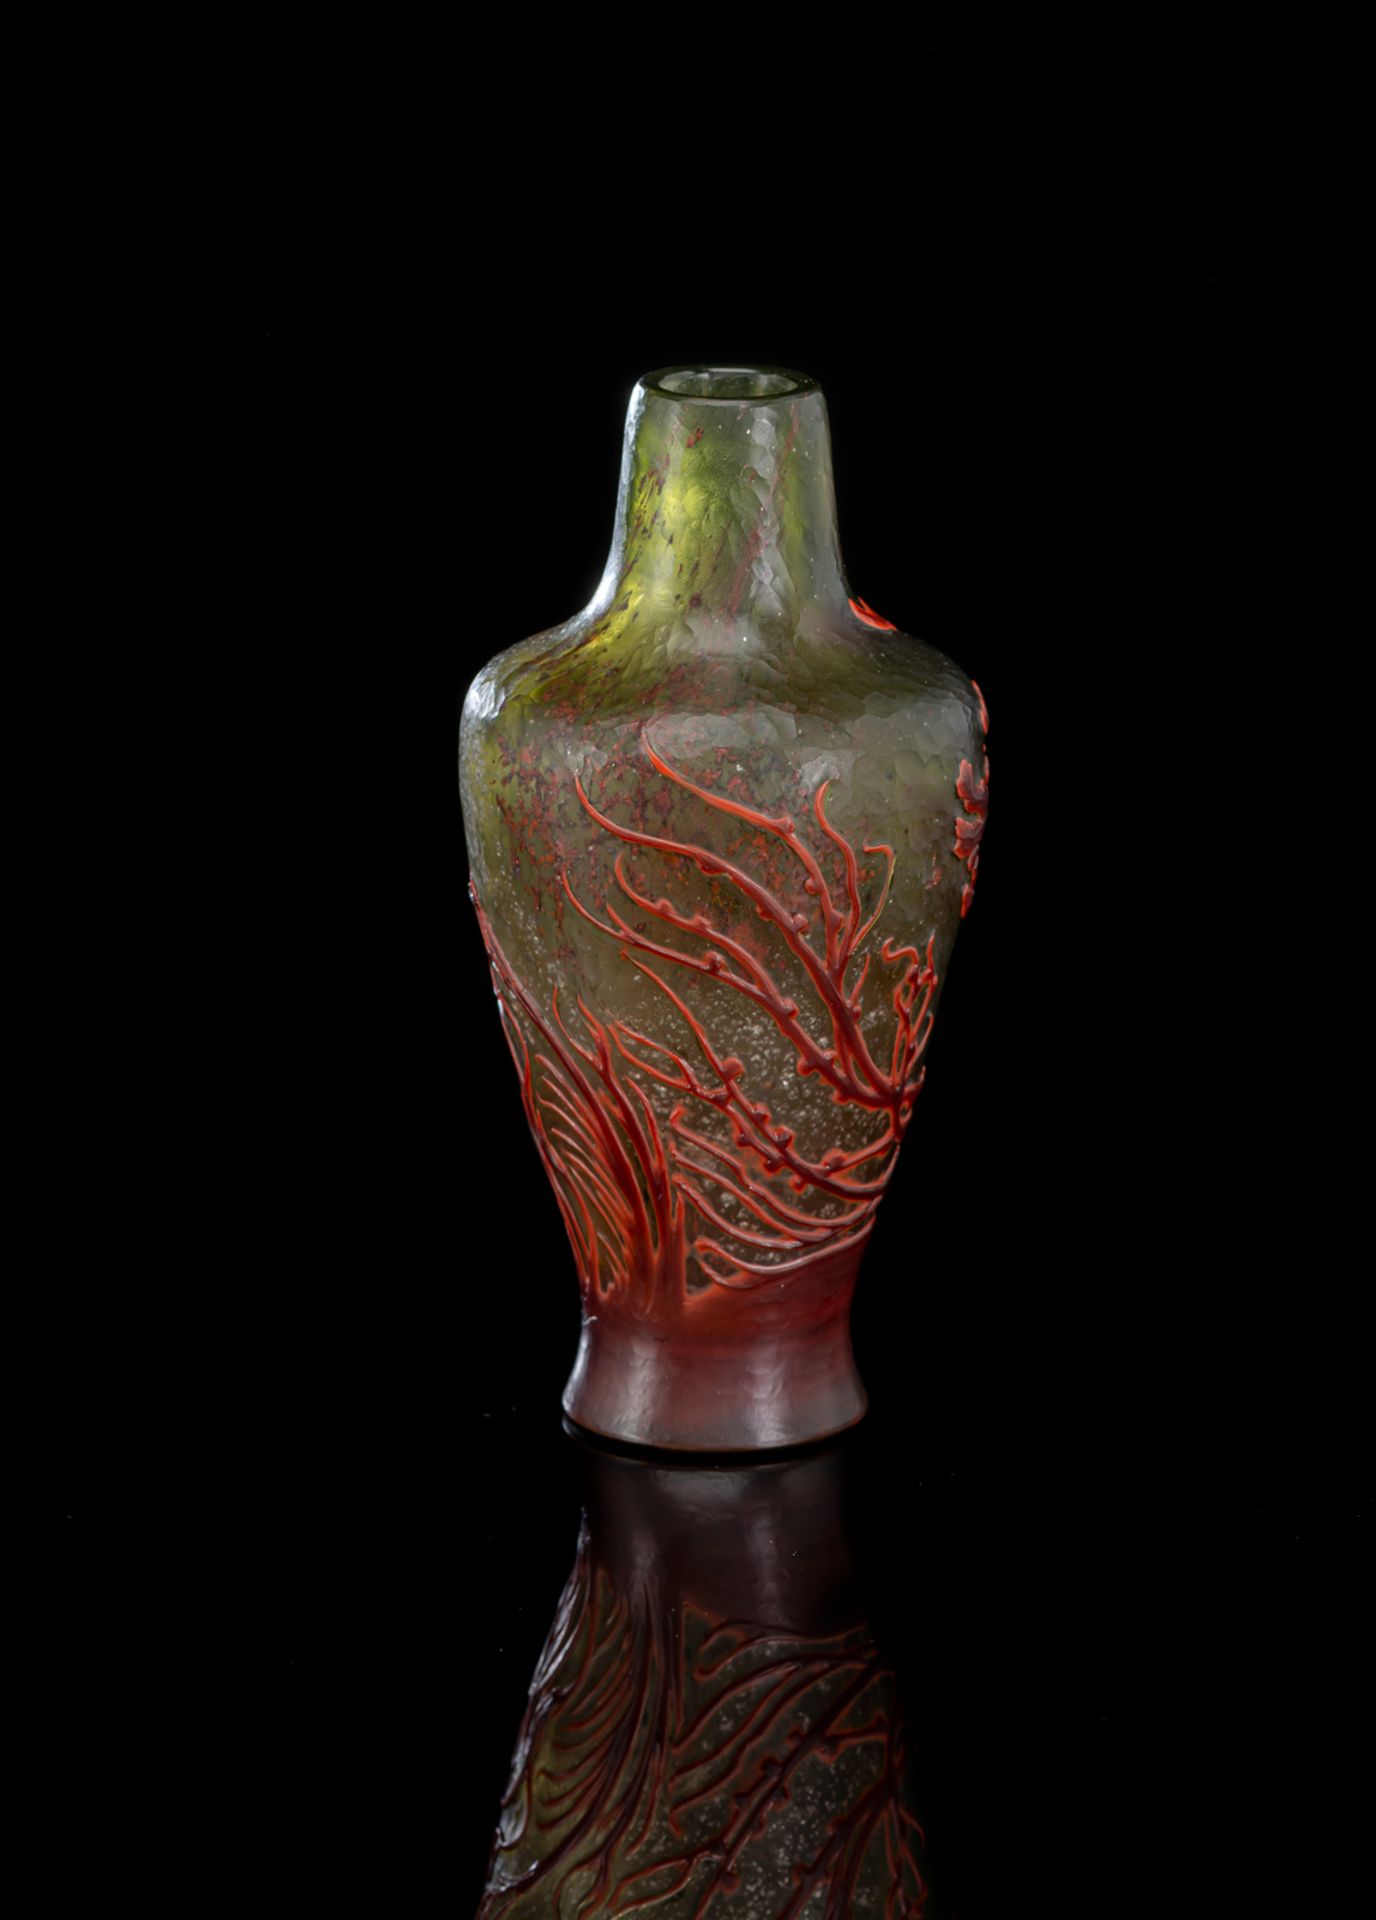 A RARE GALLÉ MOTTLED AND ENGRAVED UNDERWATER CAMEO GLASS VASE WITH RED SEAWEED - Image 2 of 3